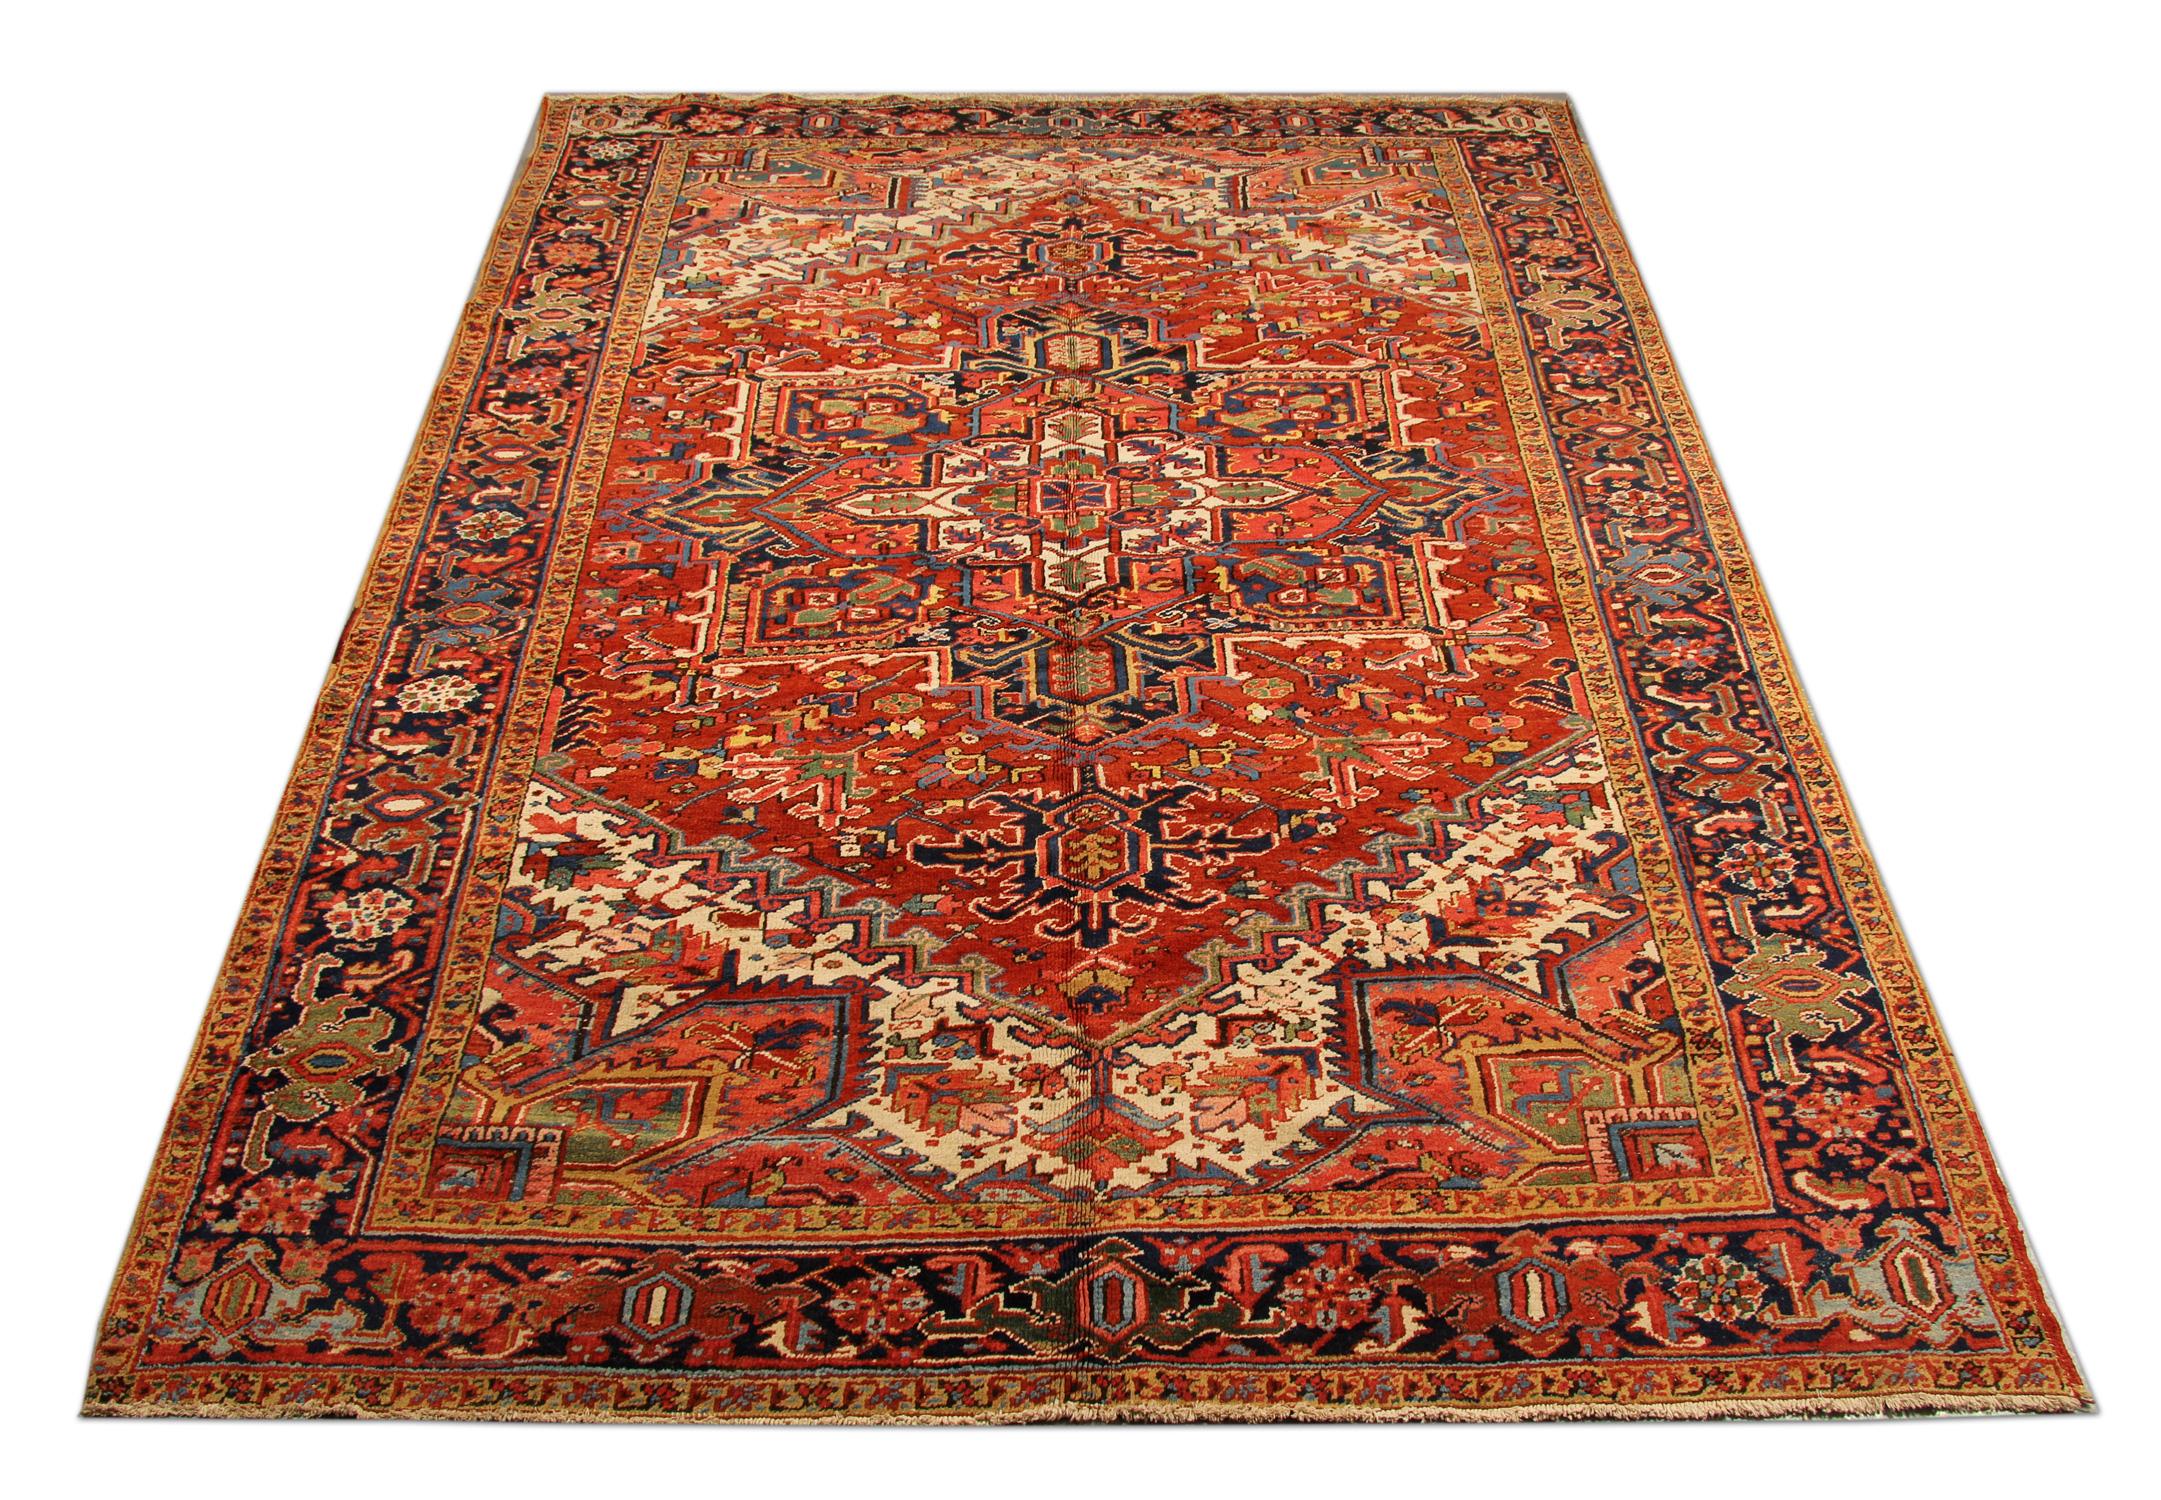 This beautiful wool area rug was constructed by hand in the 1900s and features a fantastic central medallion and surround design. Woven on a red background with an array of colours including blue, green, yellow and blue that make up the delicate